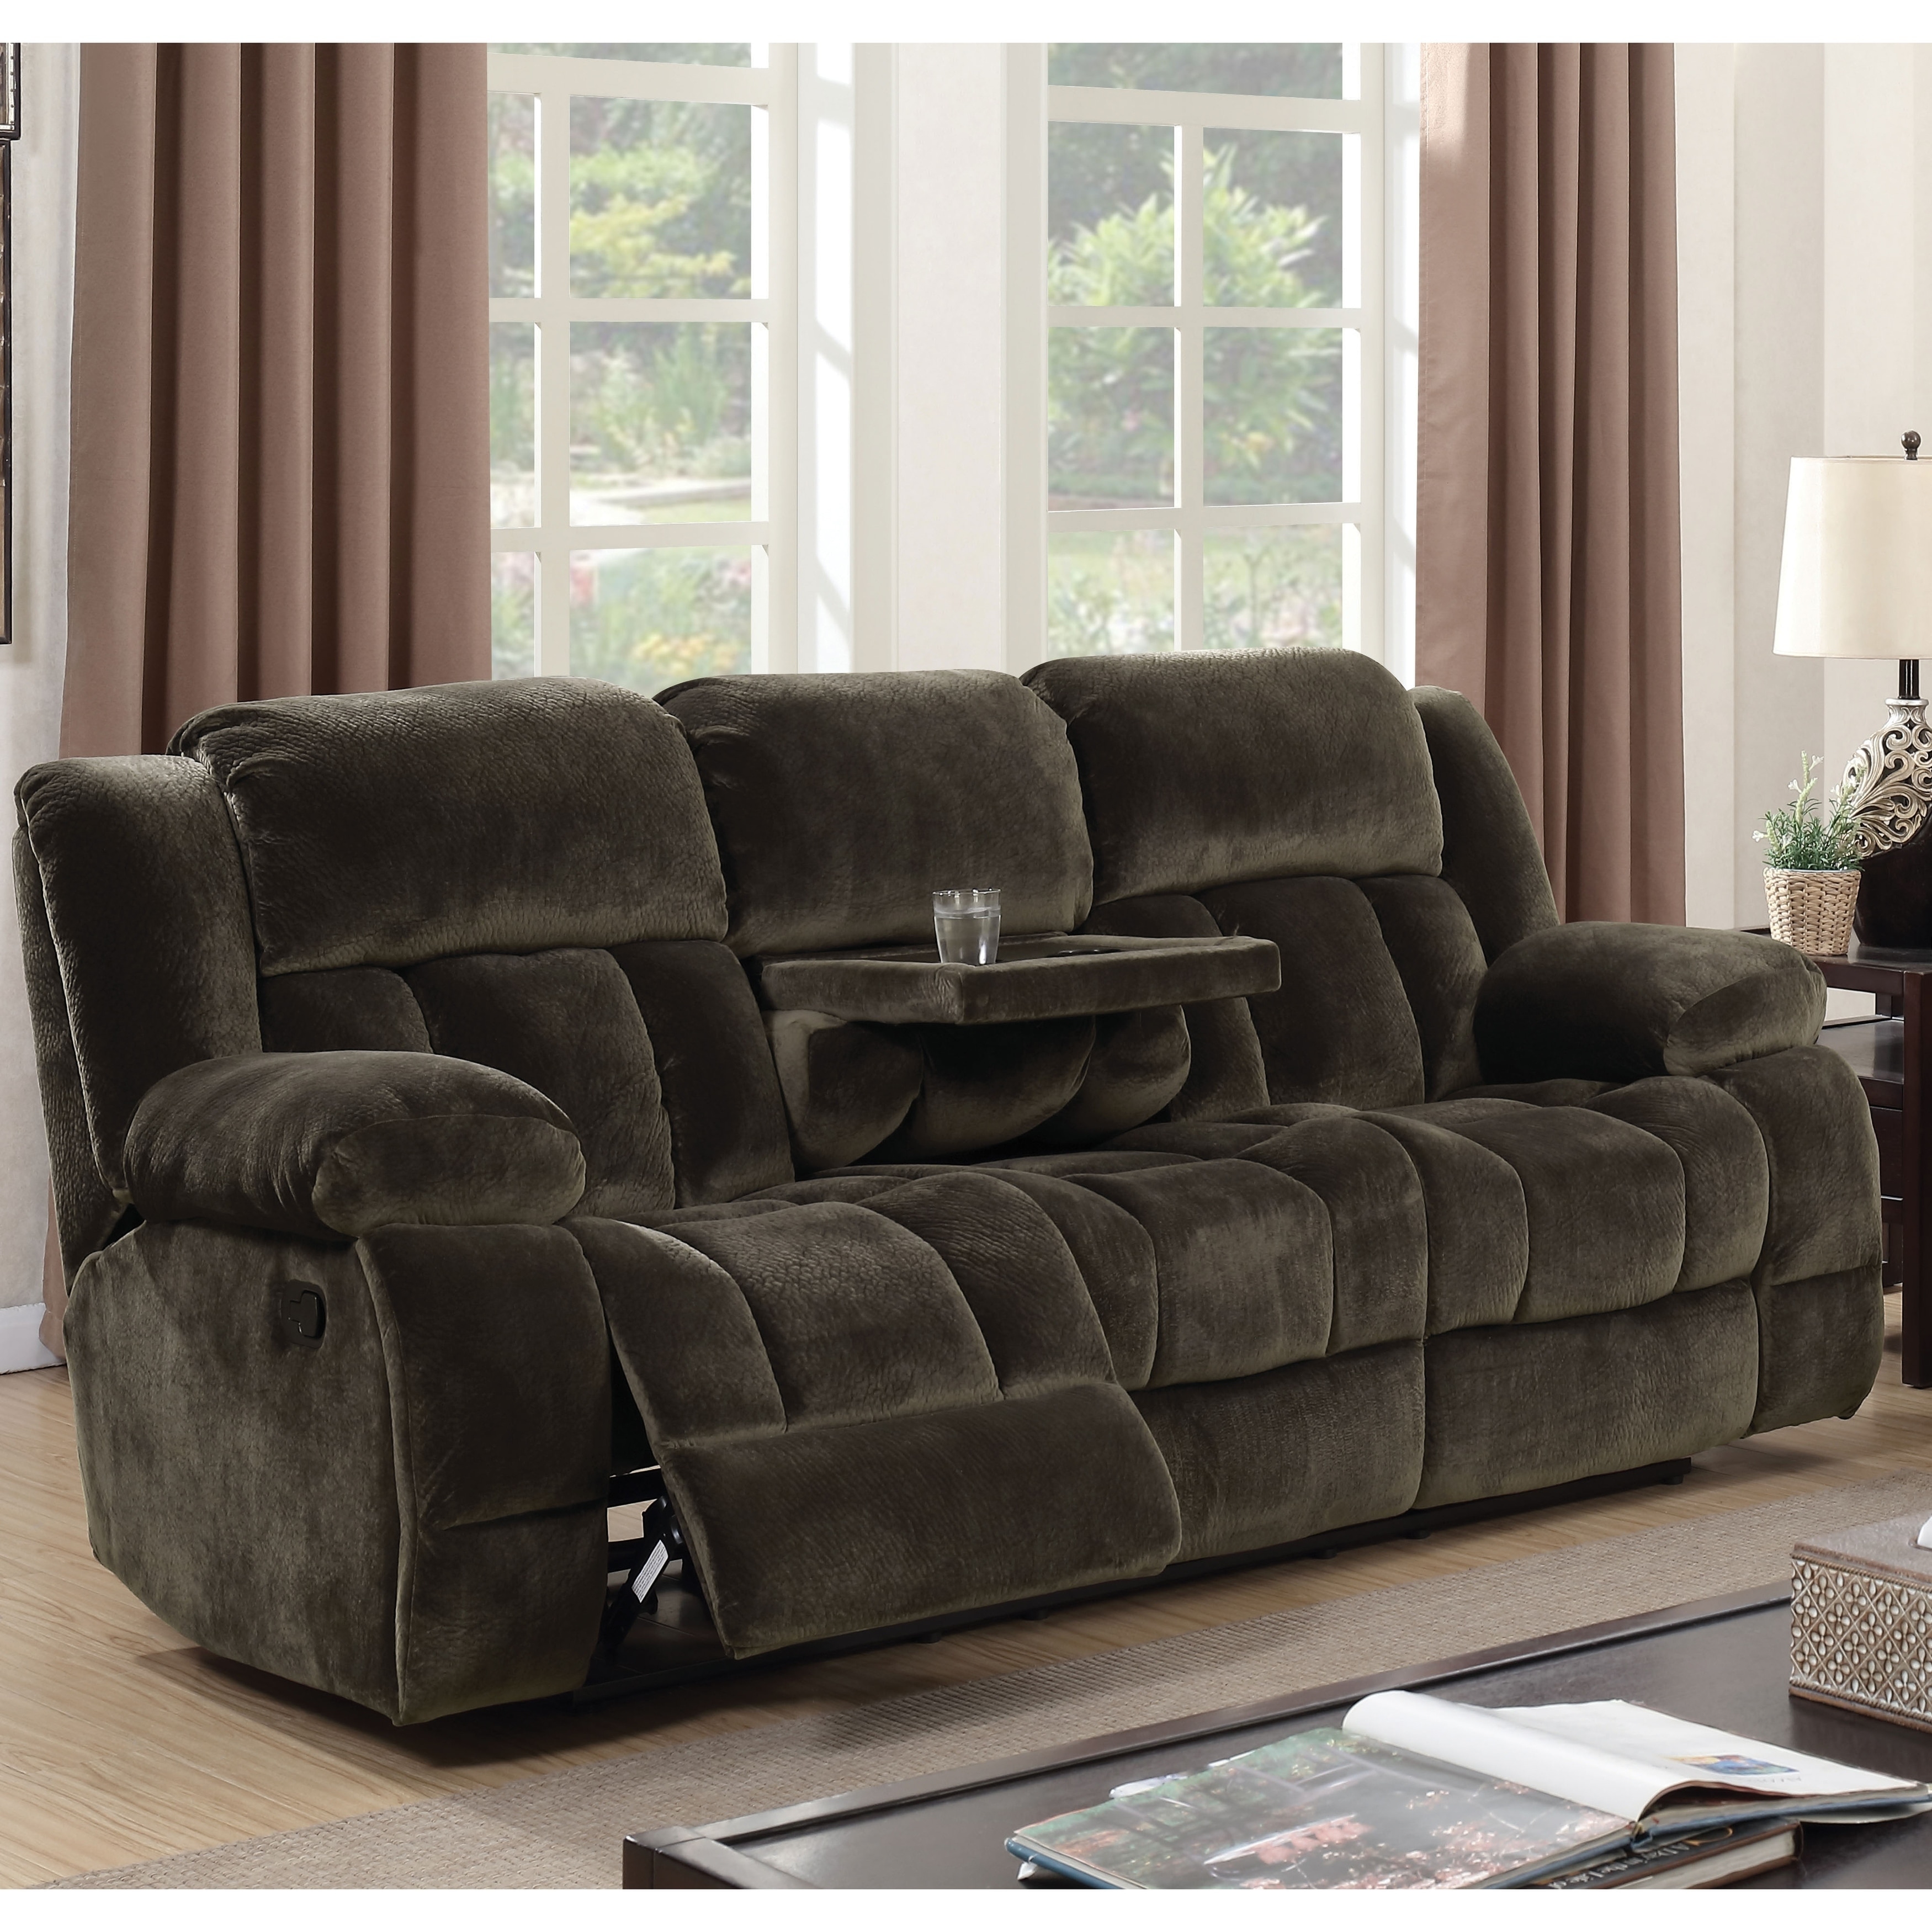 Furniture of America Ric Traditional Brown Fabric Reclining Sofa -  Overstock - 17662976